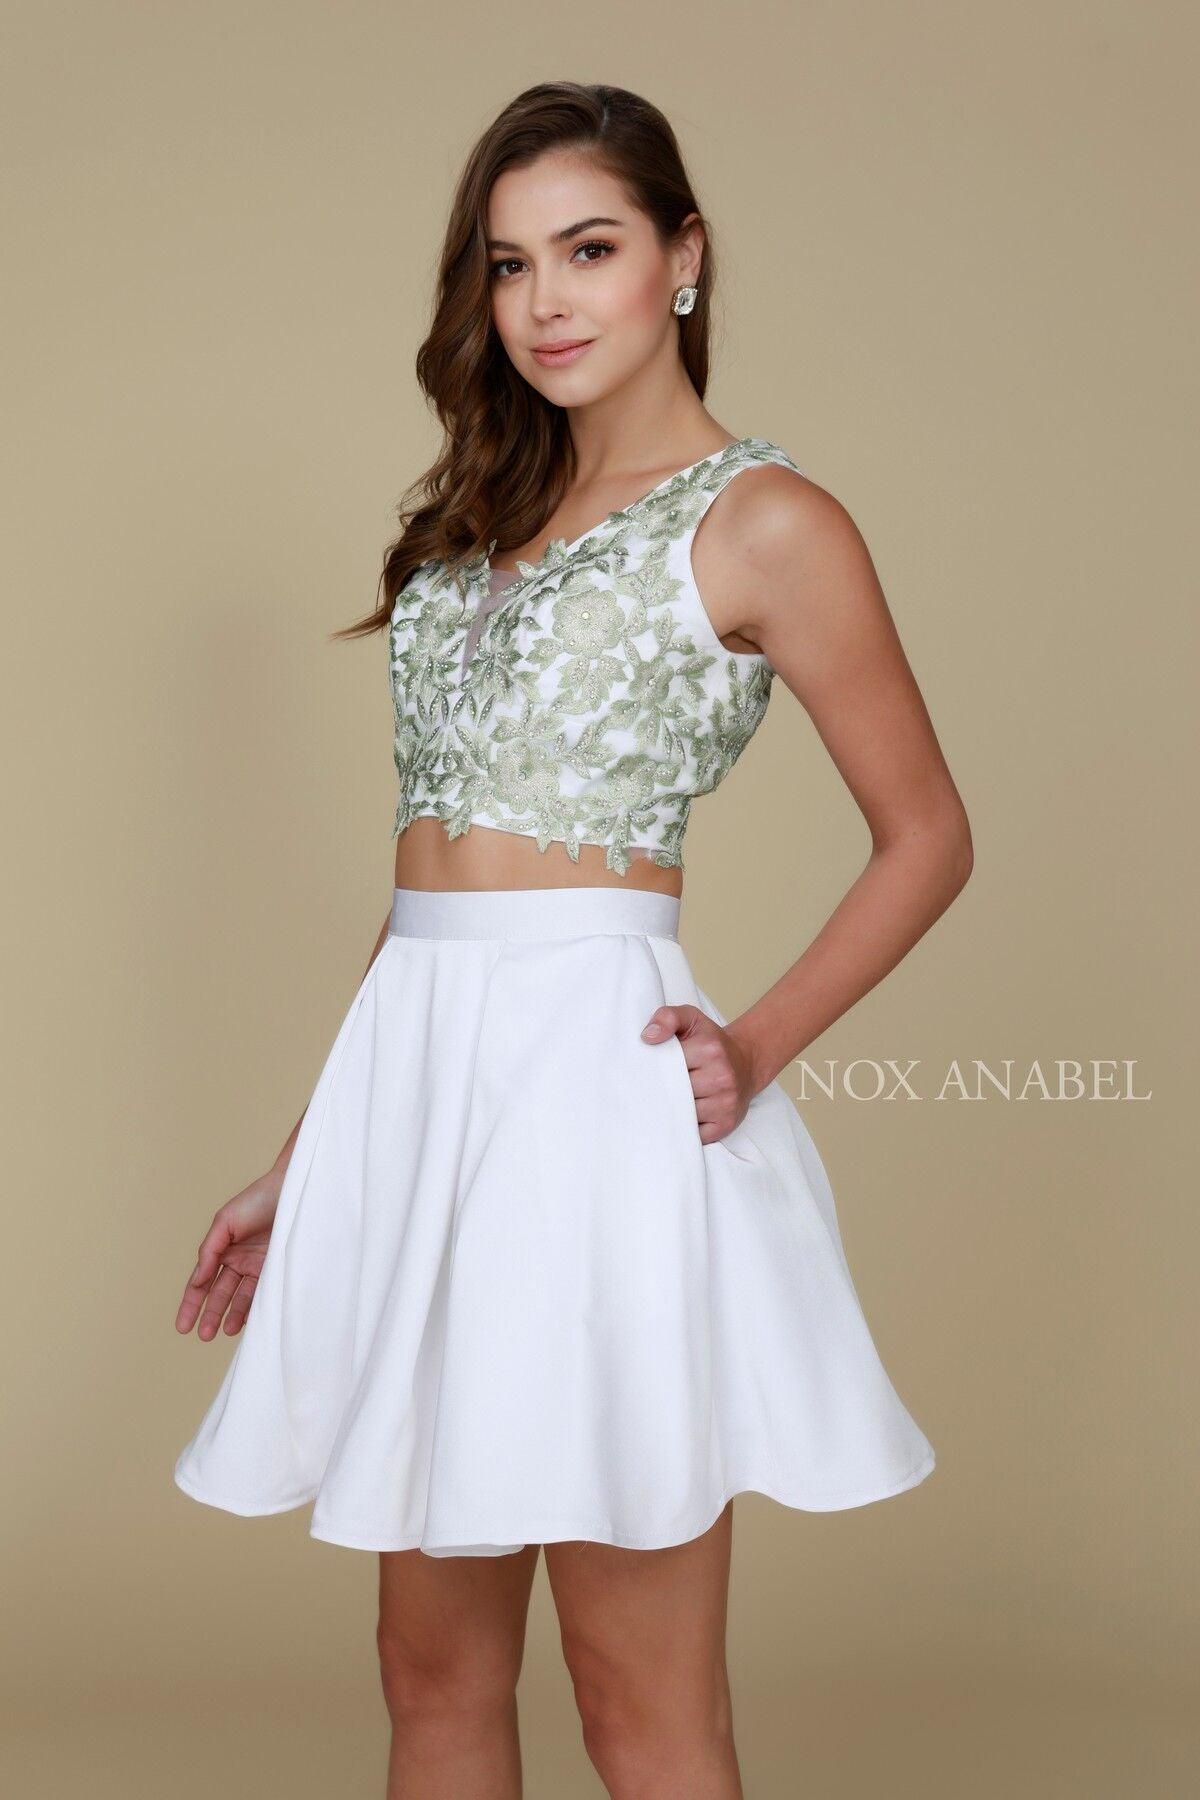 Short Homecoming Two Piece Set Prom Dress - The Dress Outlet Nox Anabel